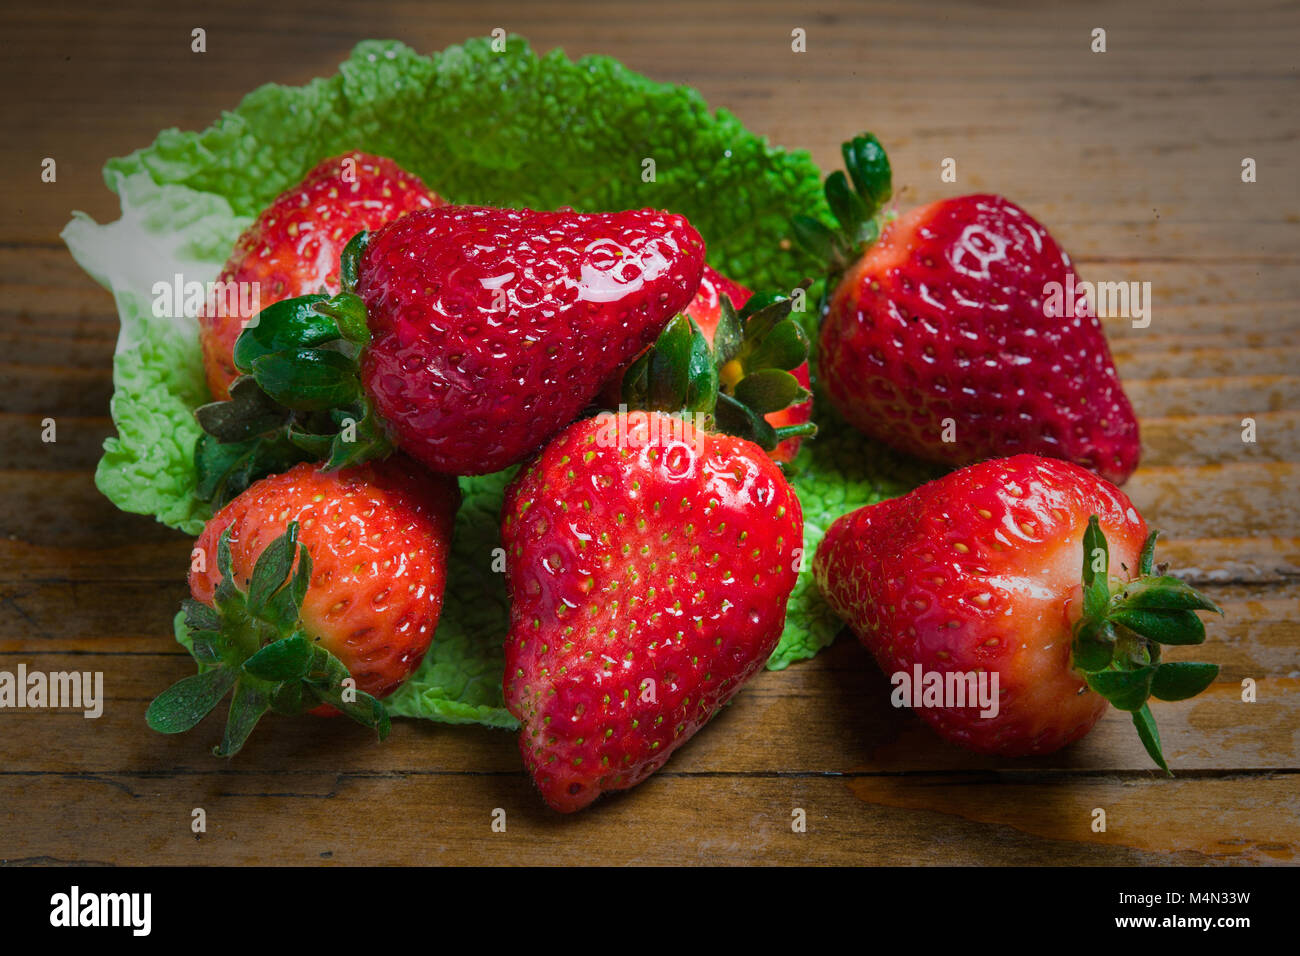 Still life of a composition of ripe and juicy strawberries over a wooden board. Abruzzo, Italy, Europe Stock Photo